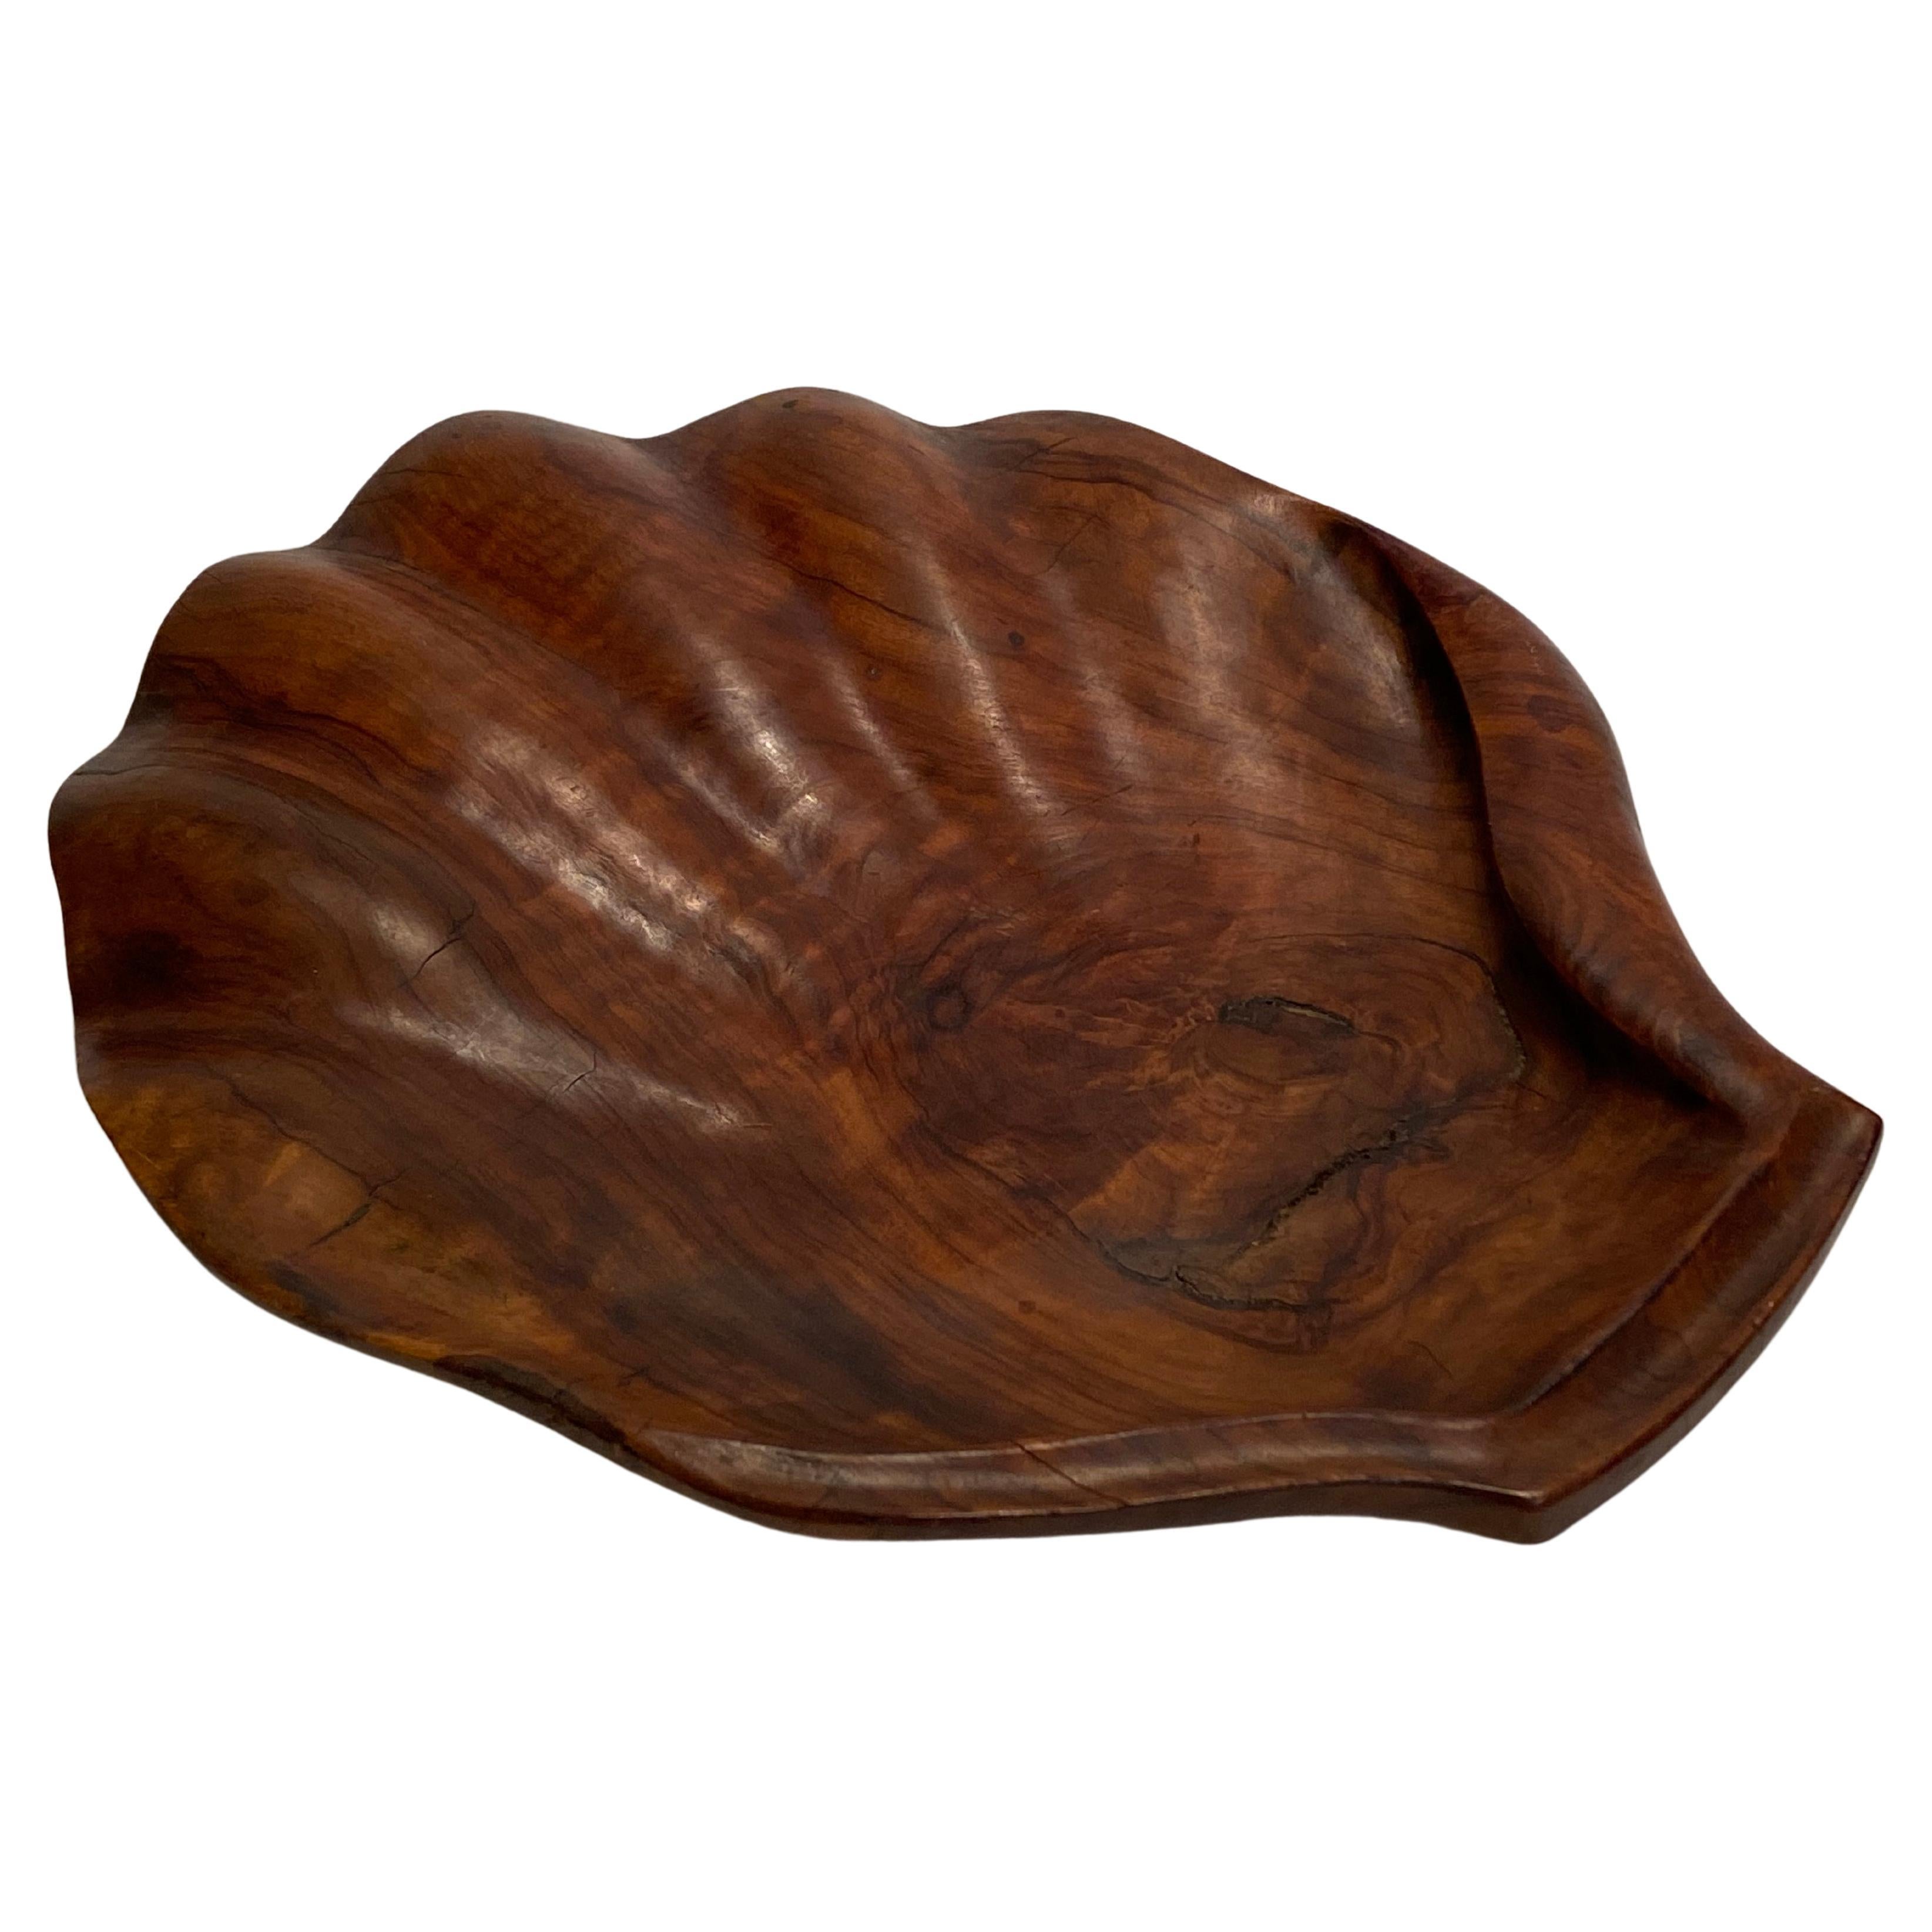 Dan Harner Scallop Shell Carved Wood Catch All For Sale